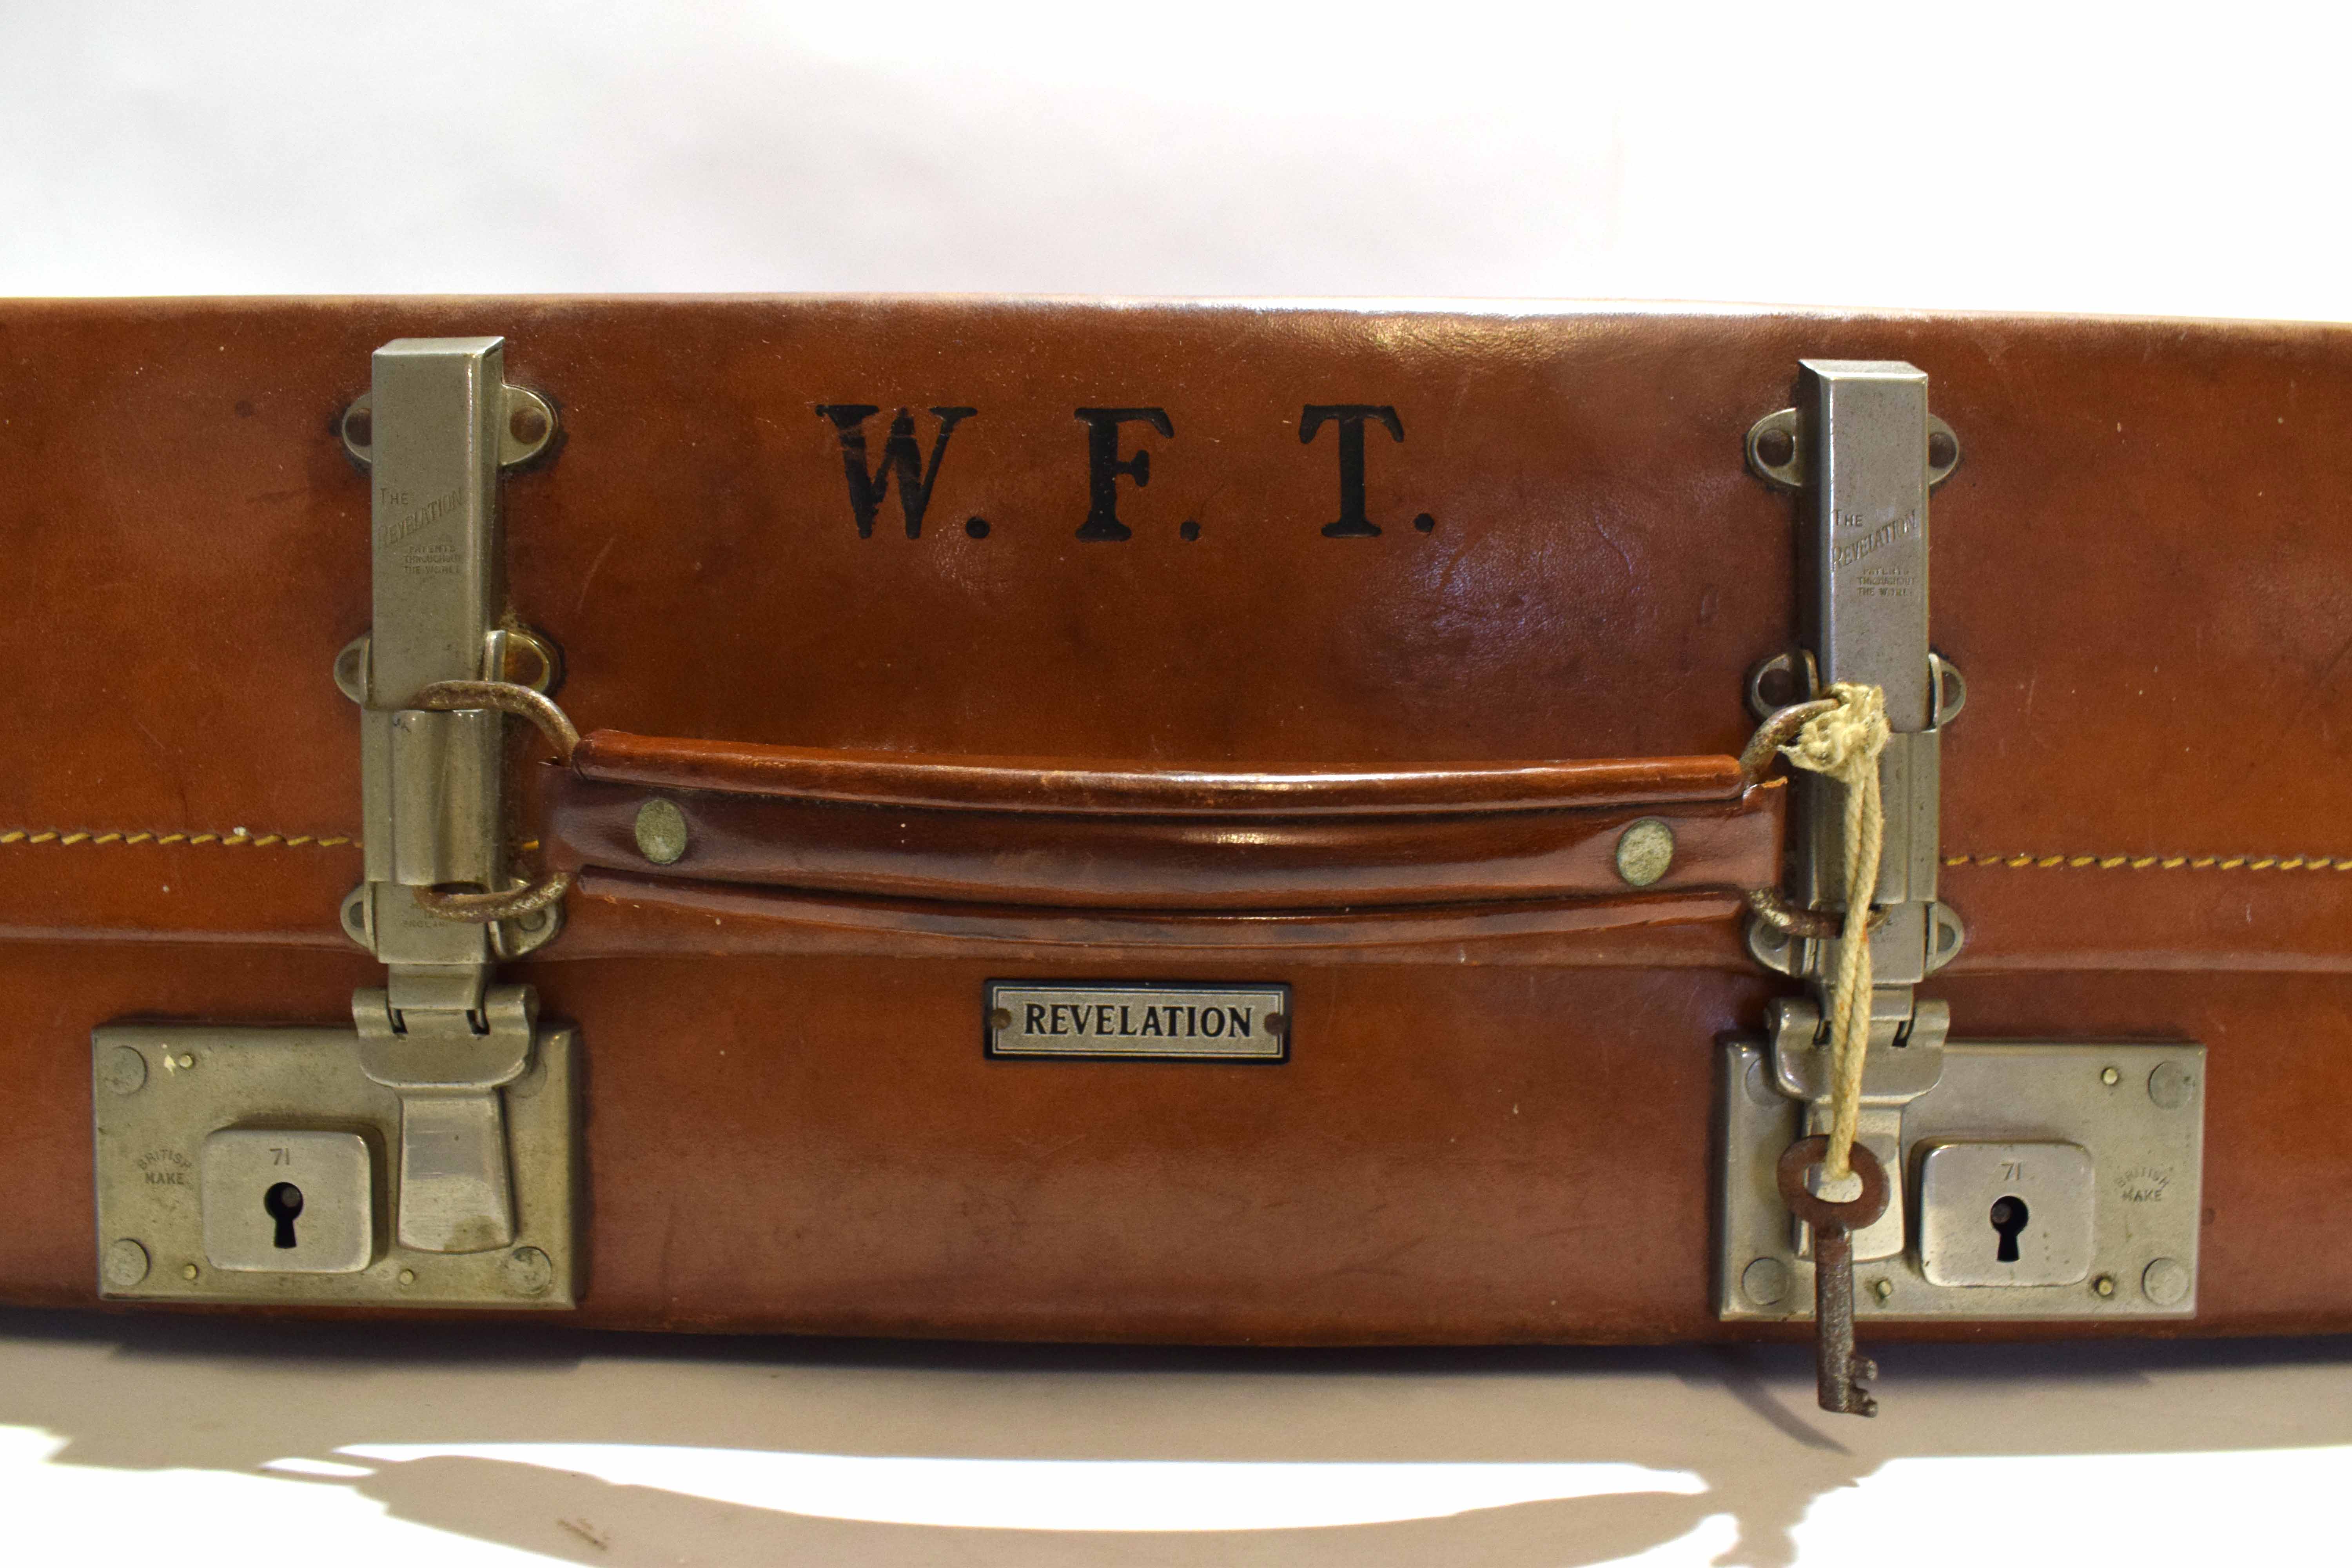 Vintage Revelation leather suitcase with nickel finished fitting, initial to front W F T - Image 2 of 2